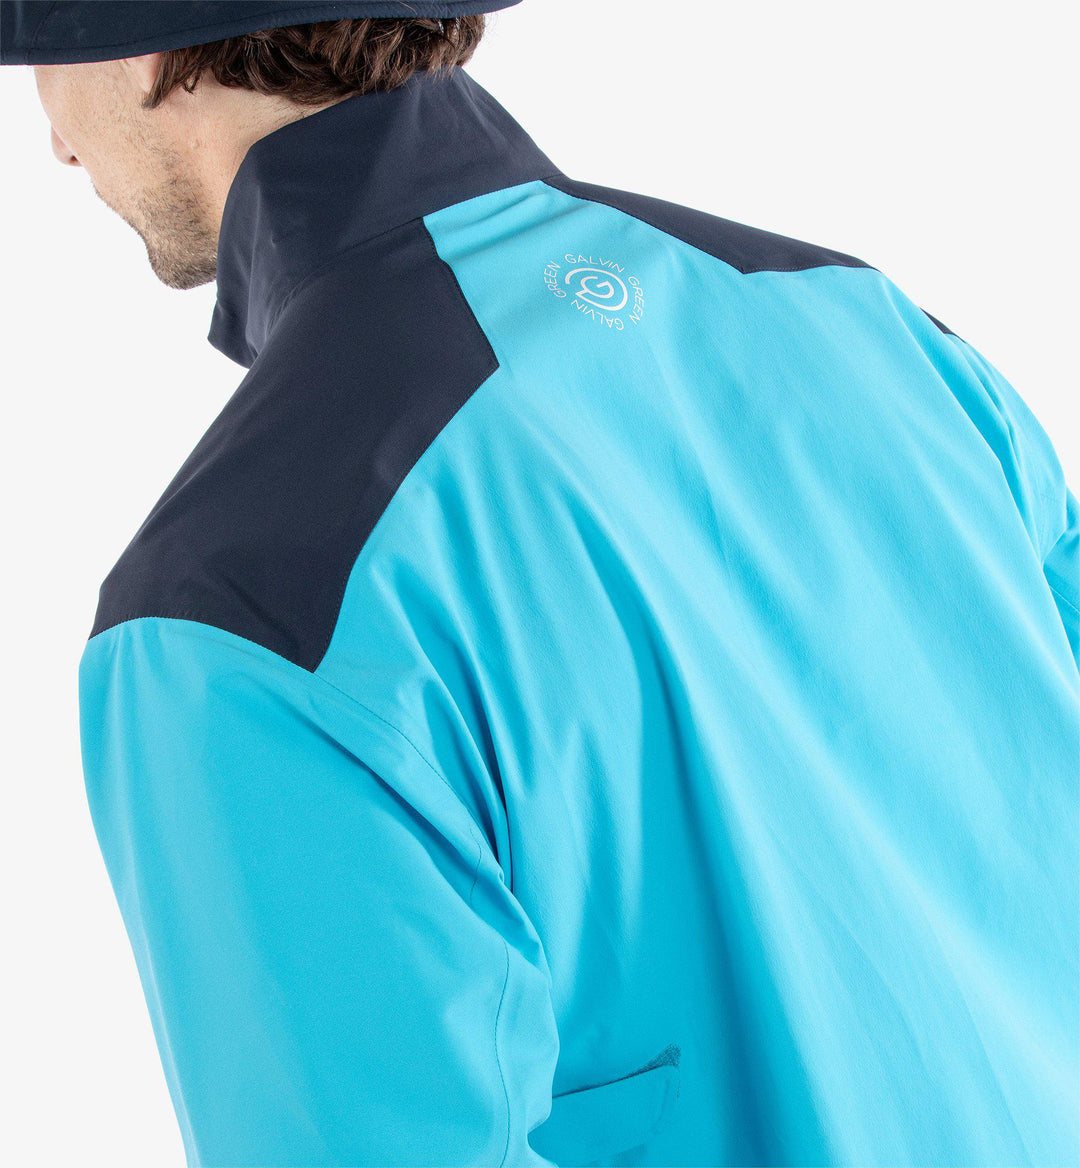 Ashford is a Waterproof jacket for Men in the color Aqua/Navy/White(6)